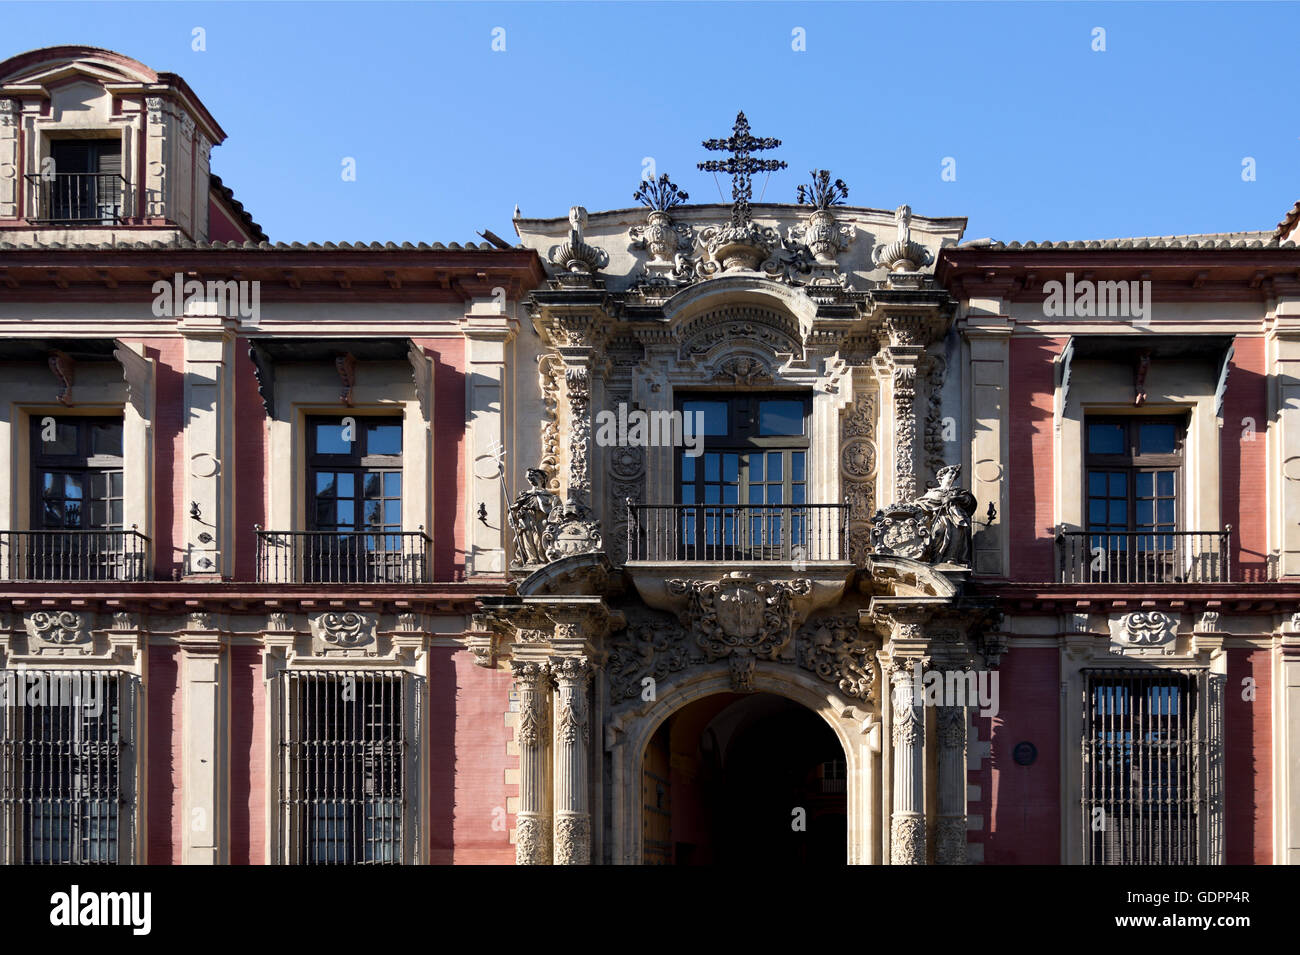 Facade of the Spanish Baroque architectural style Archbishop Palace of Seville, Spain Stock Photo